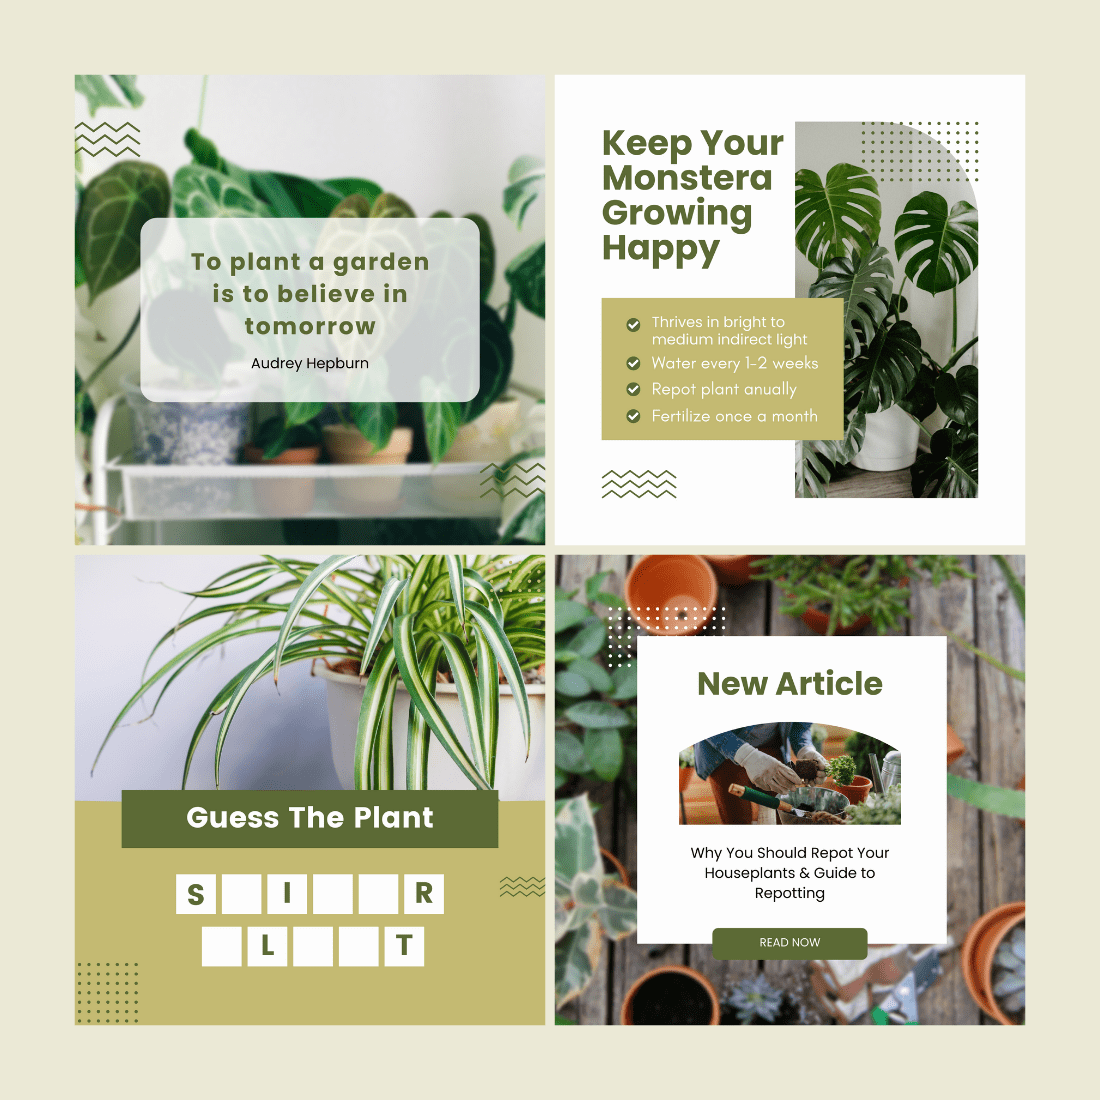 Green Space Plant Store Editable Instagram Post preview image.